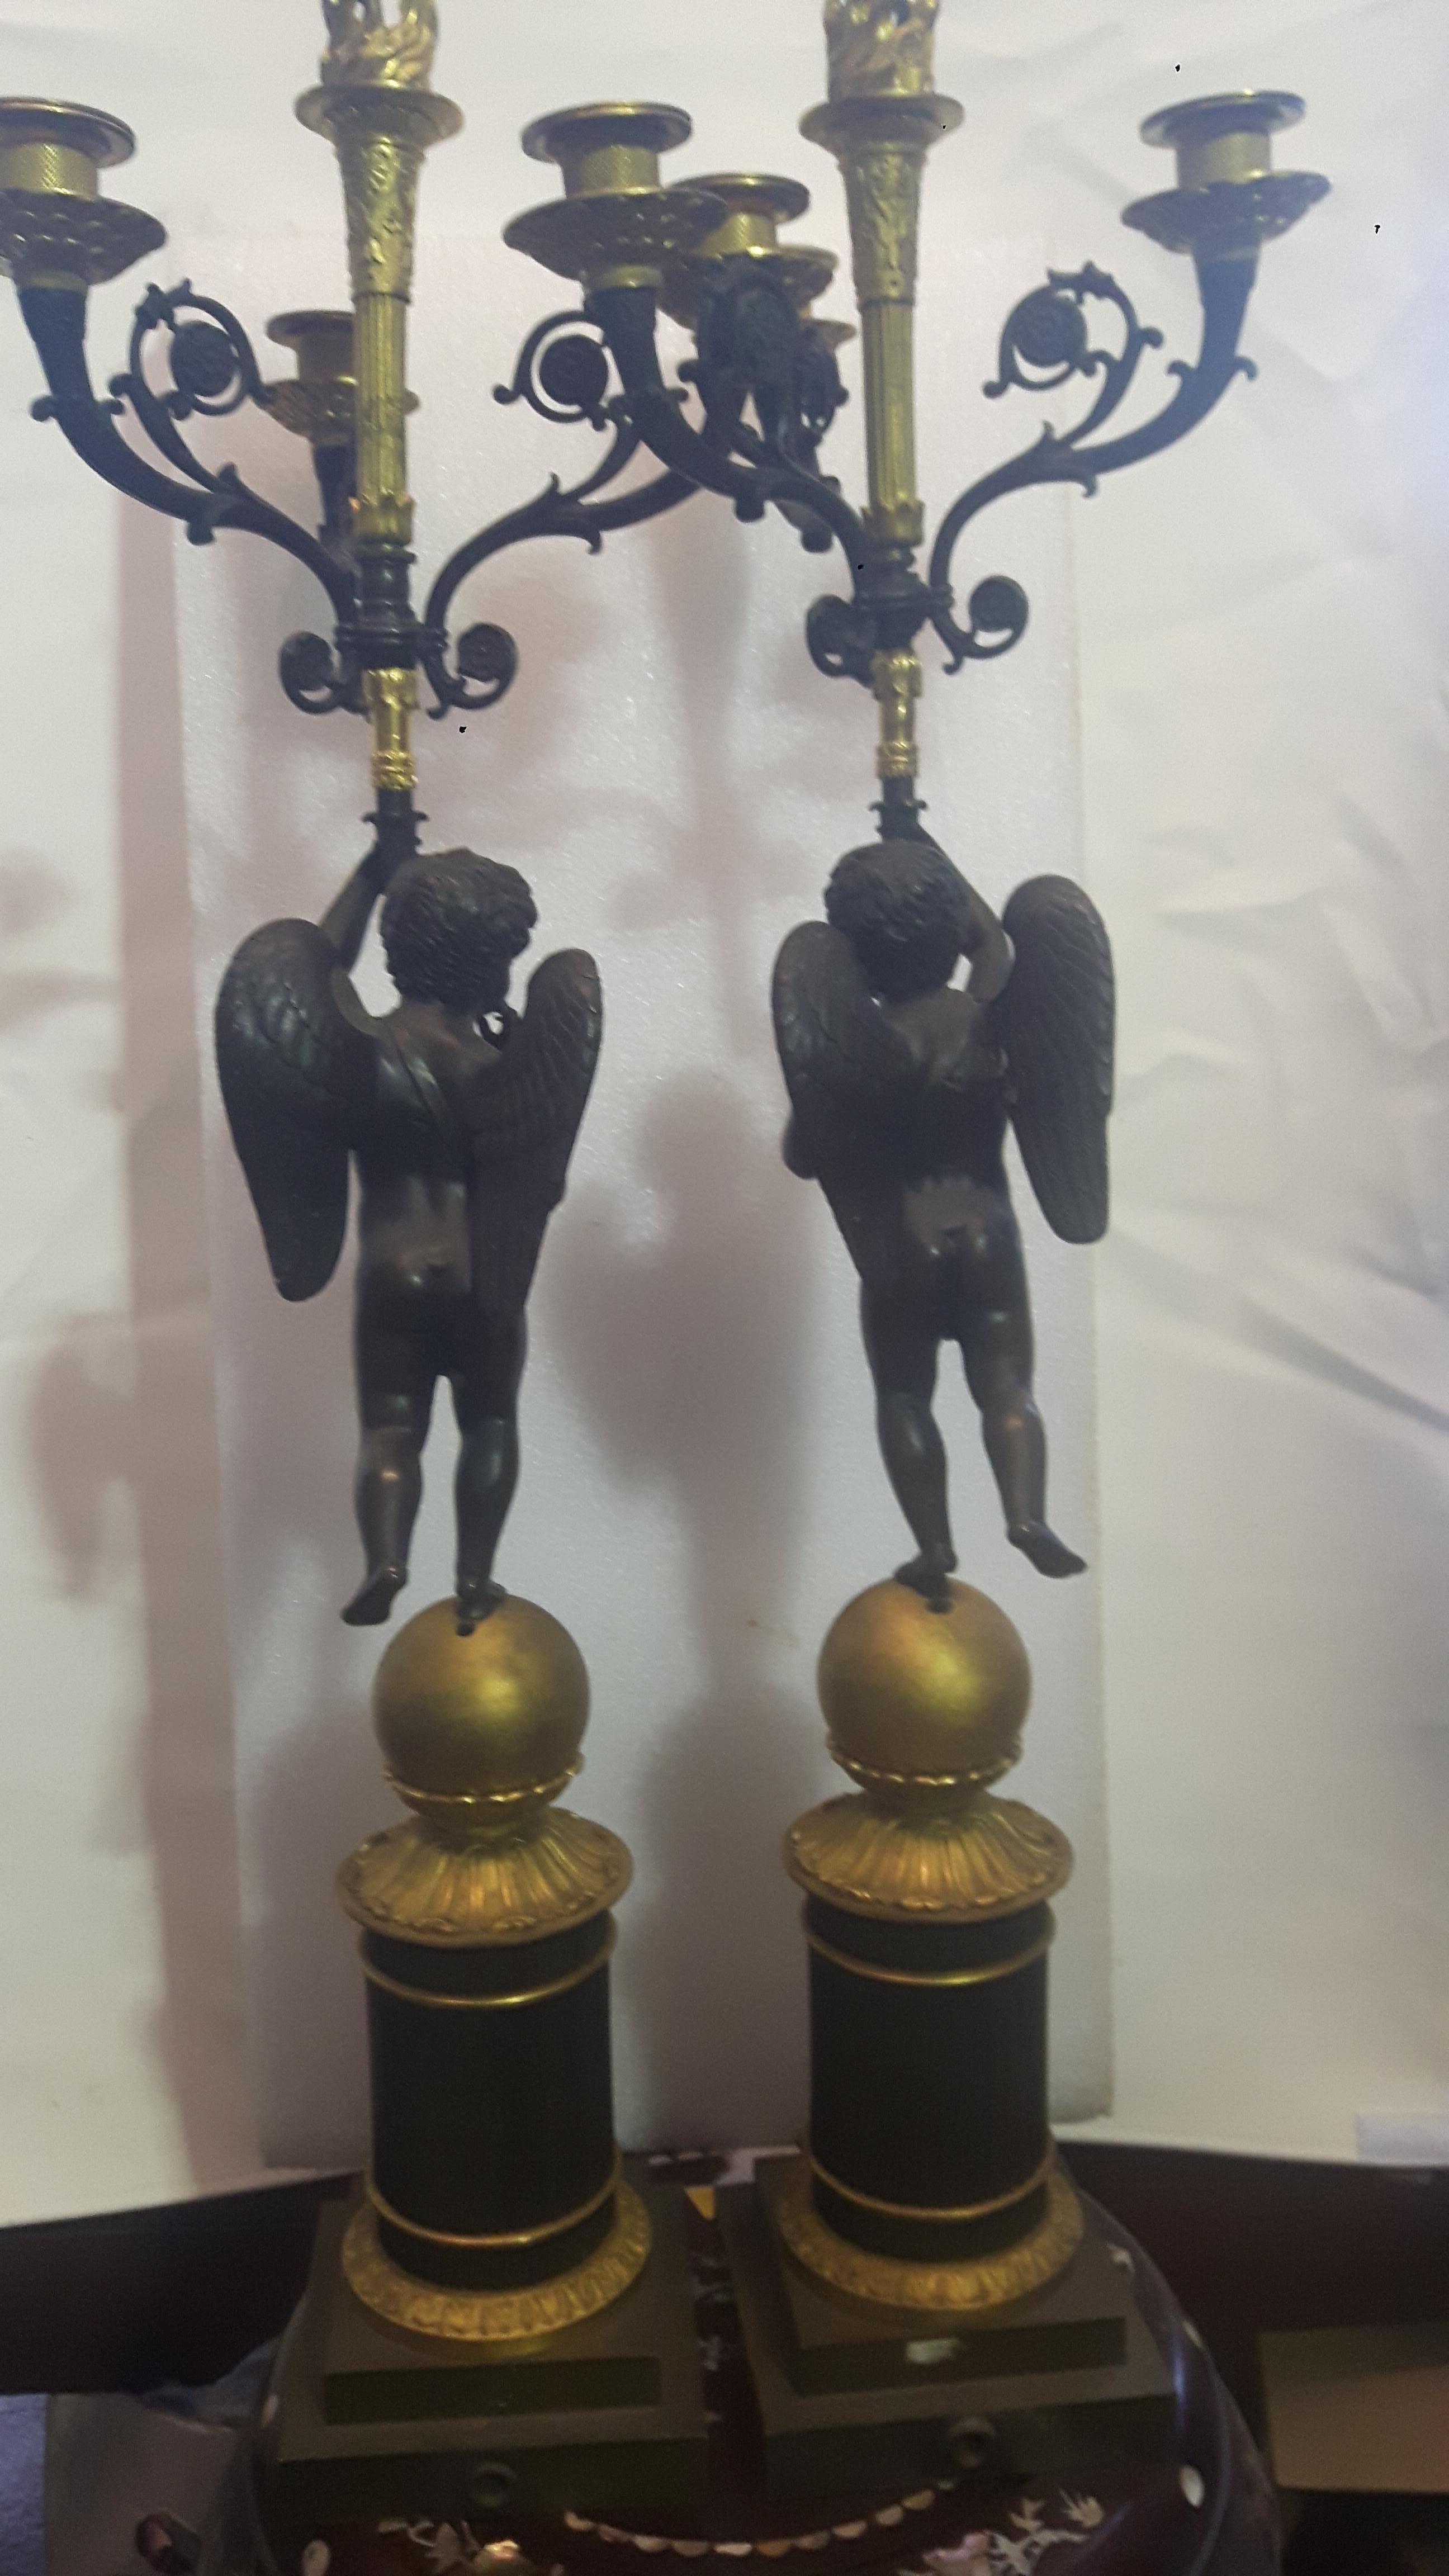 A pair of 19th century bronze and ormolu candelabra, with beaded nozzles held by well cast winged cherubs perched on spheres, ending on square plinth bases.